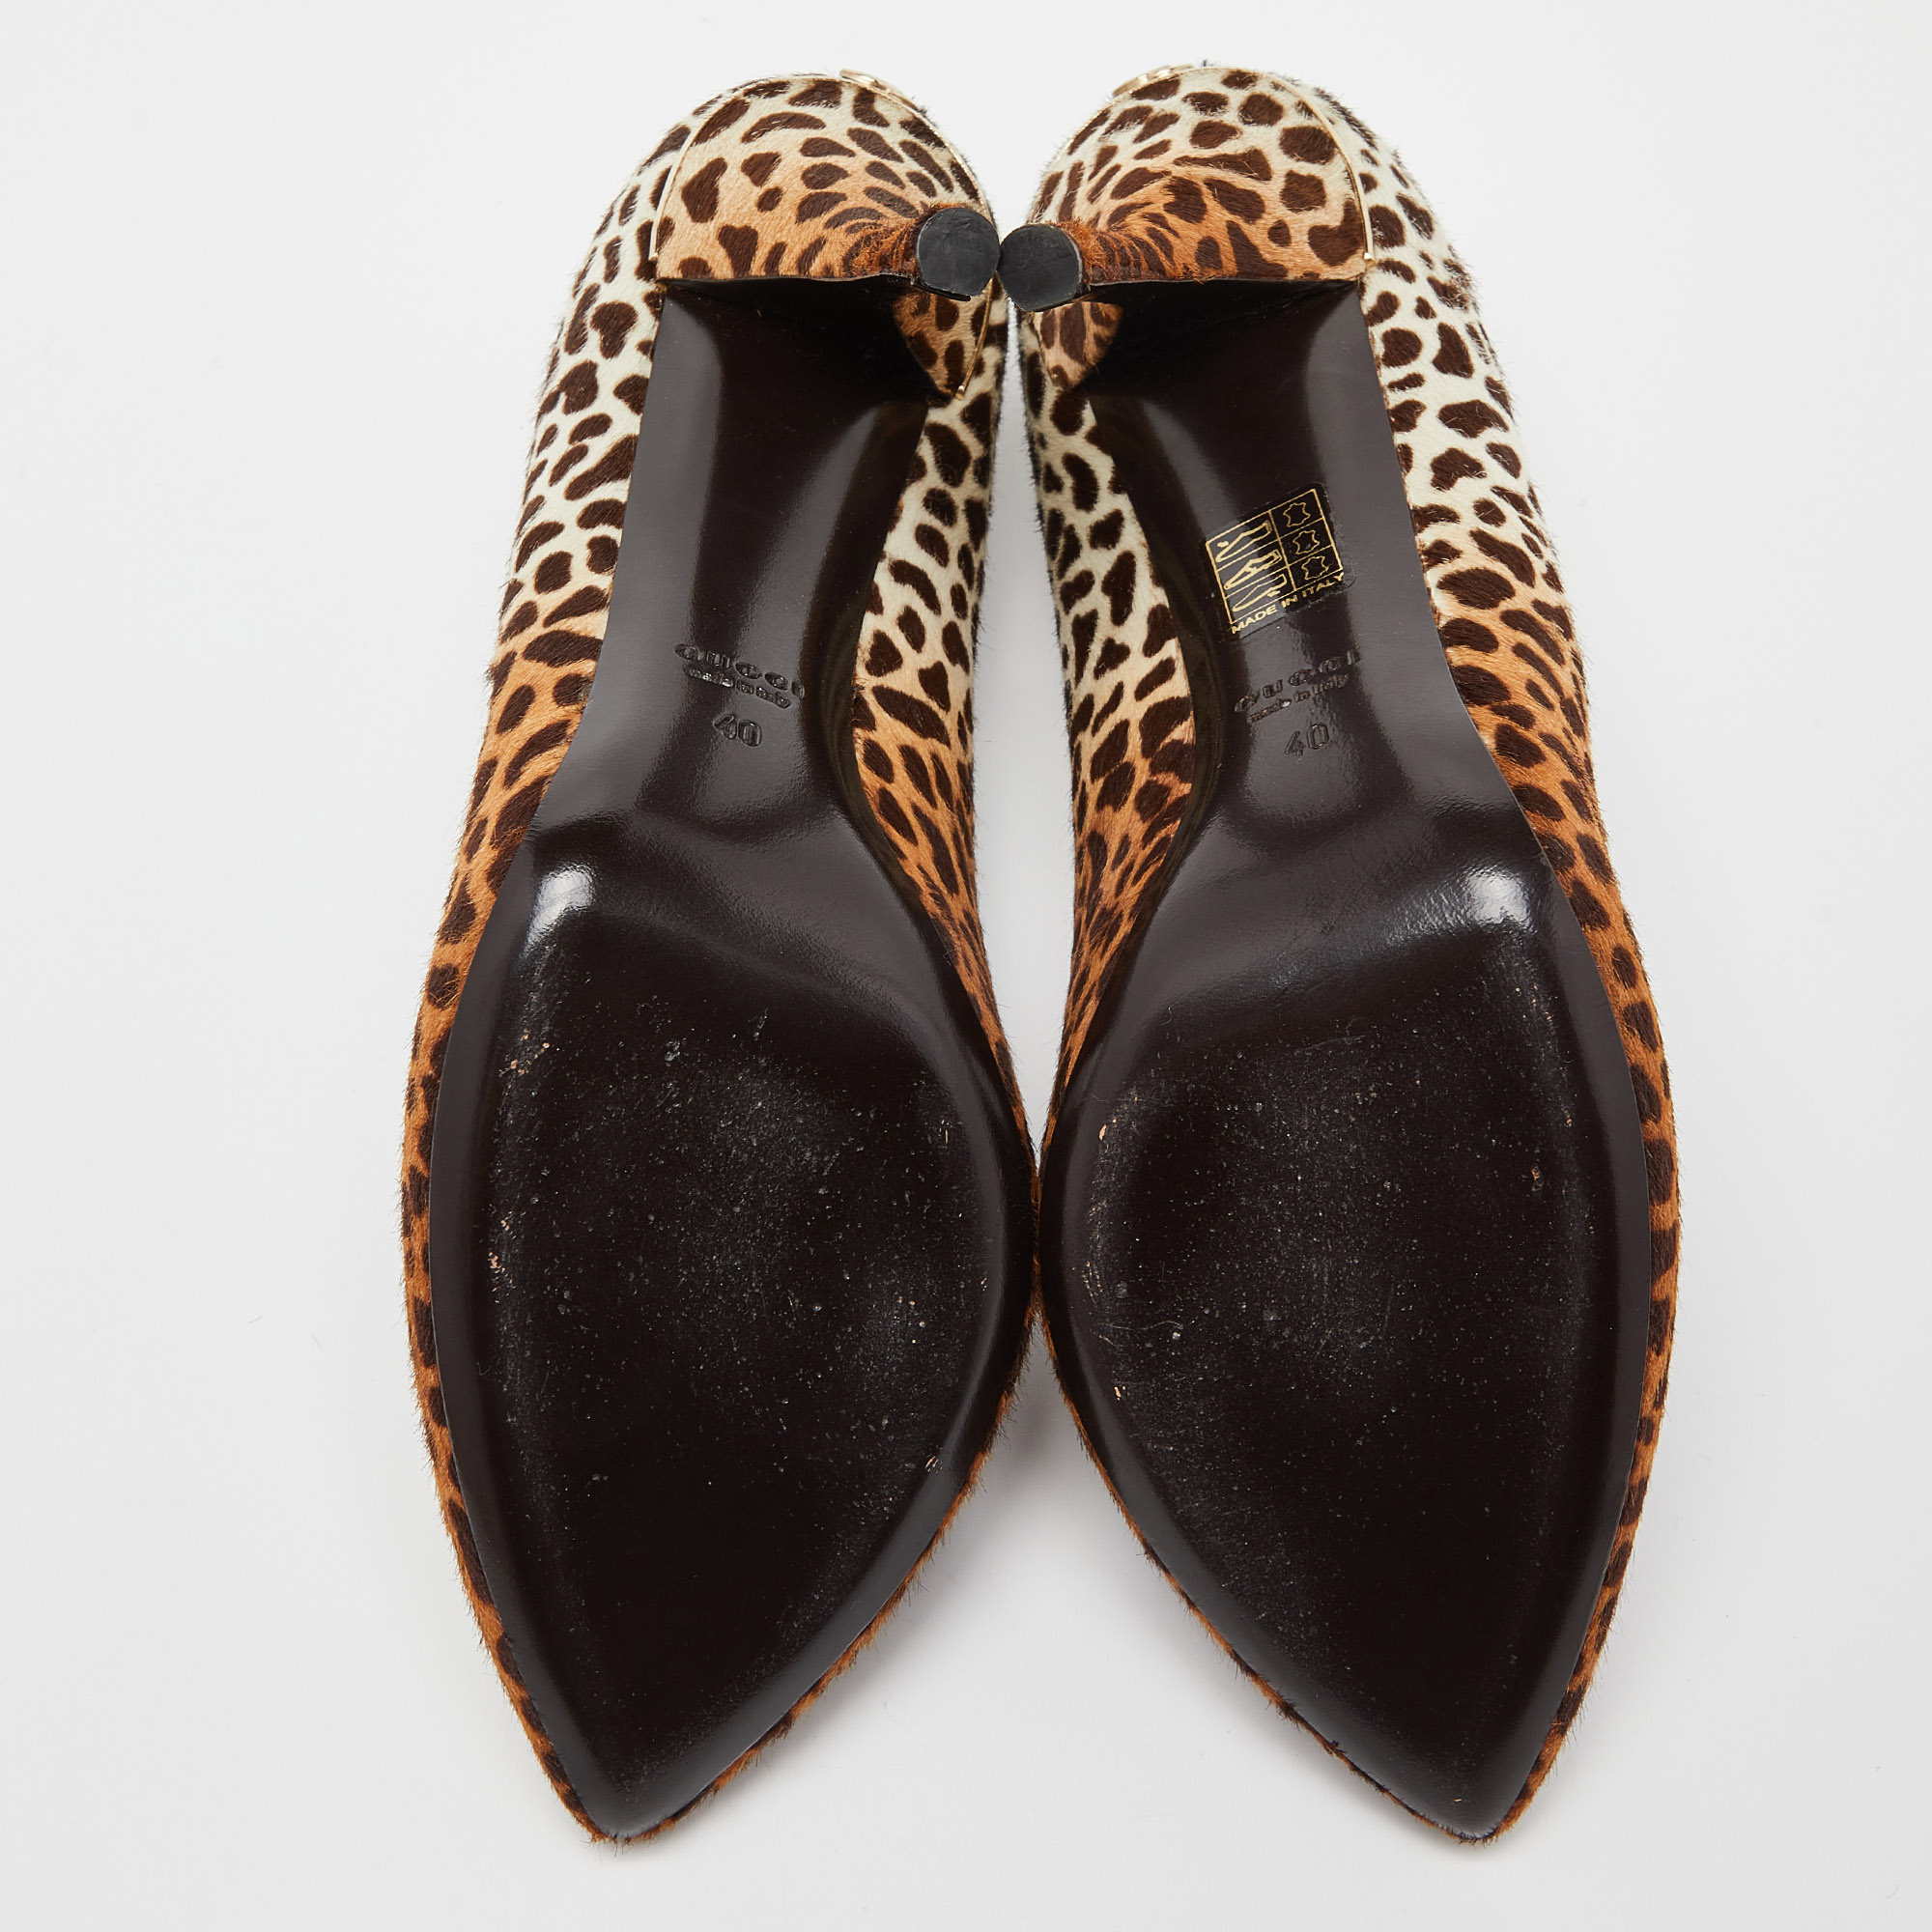 Gucci Brown Leopard Print Calfhair And Patent Leather Pointed Toe Pumps Size 40